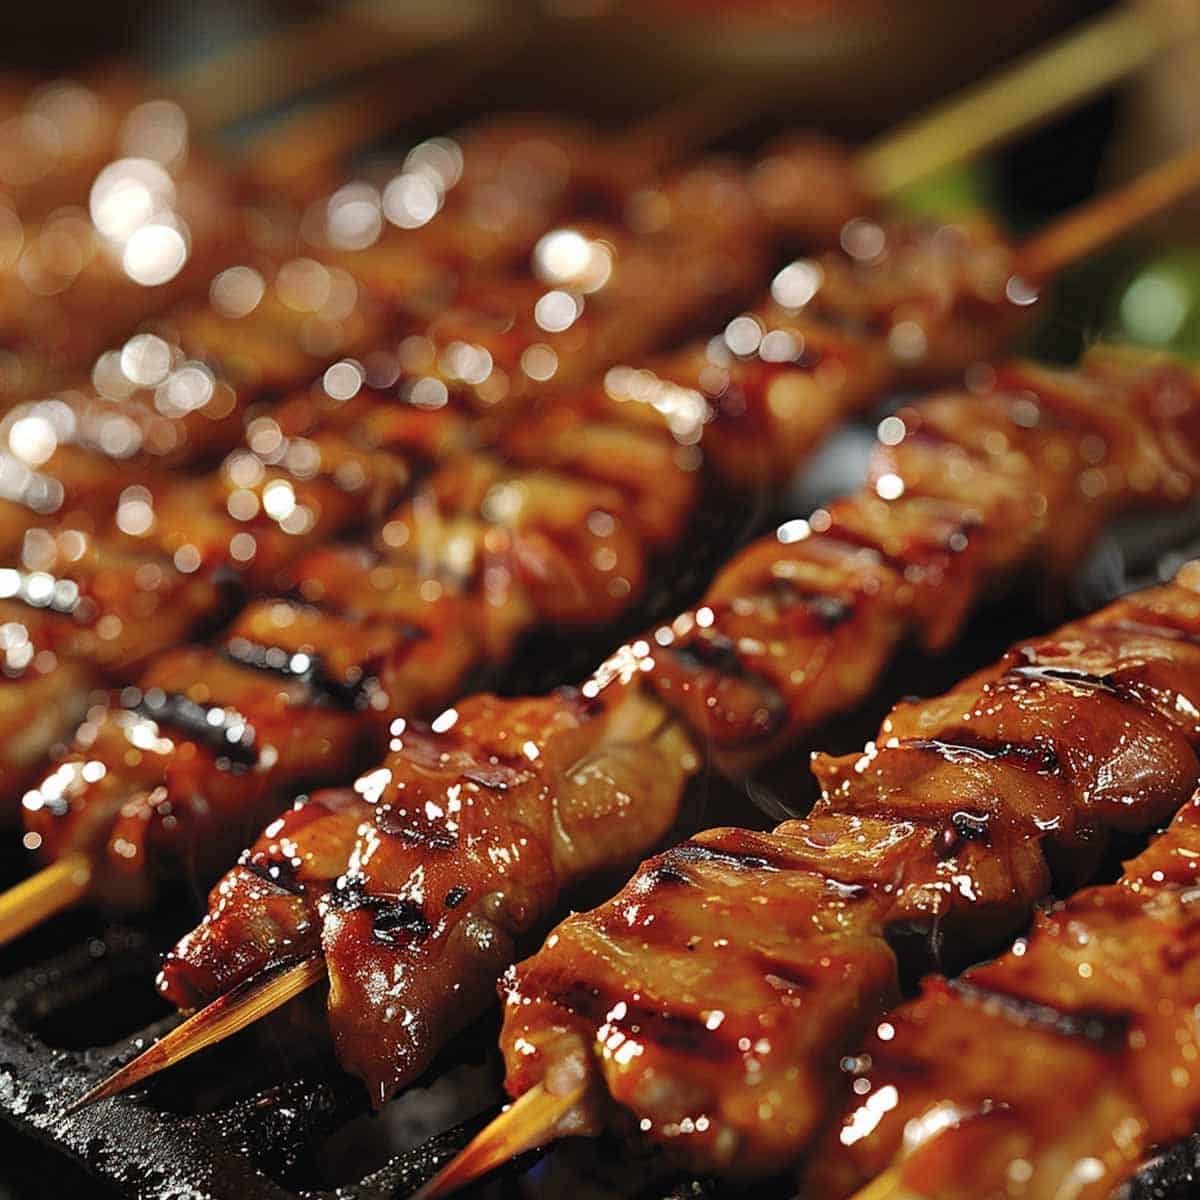 Grilled chicken skewers with a golden-brown crust, served hot and ready to eat